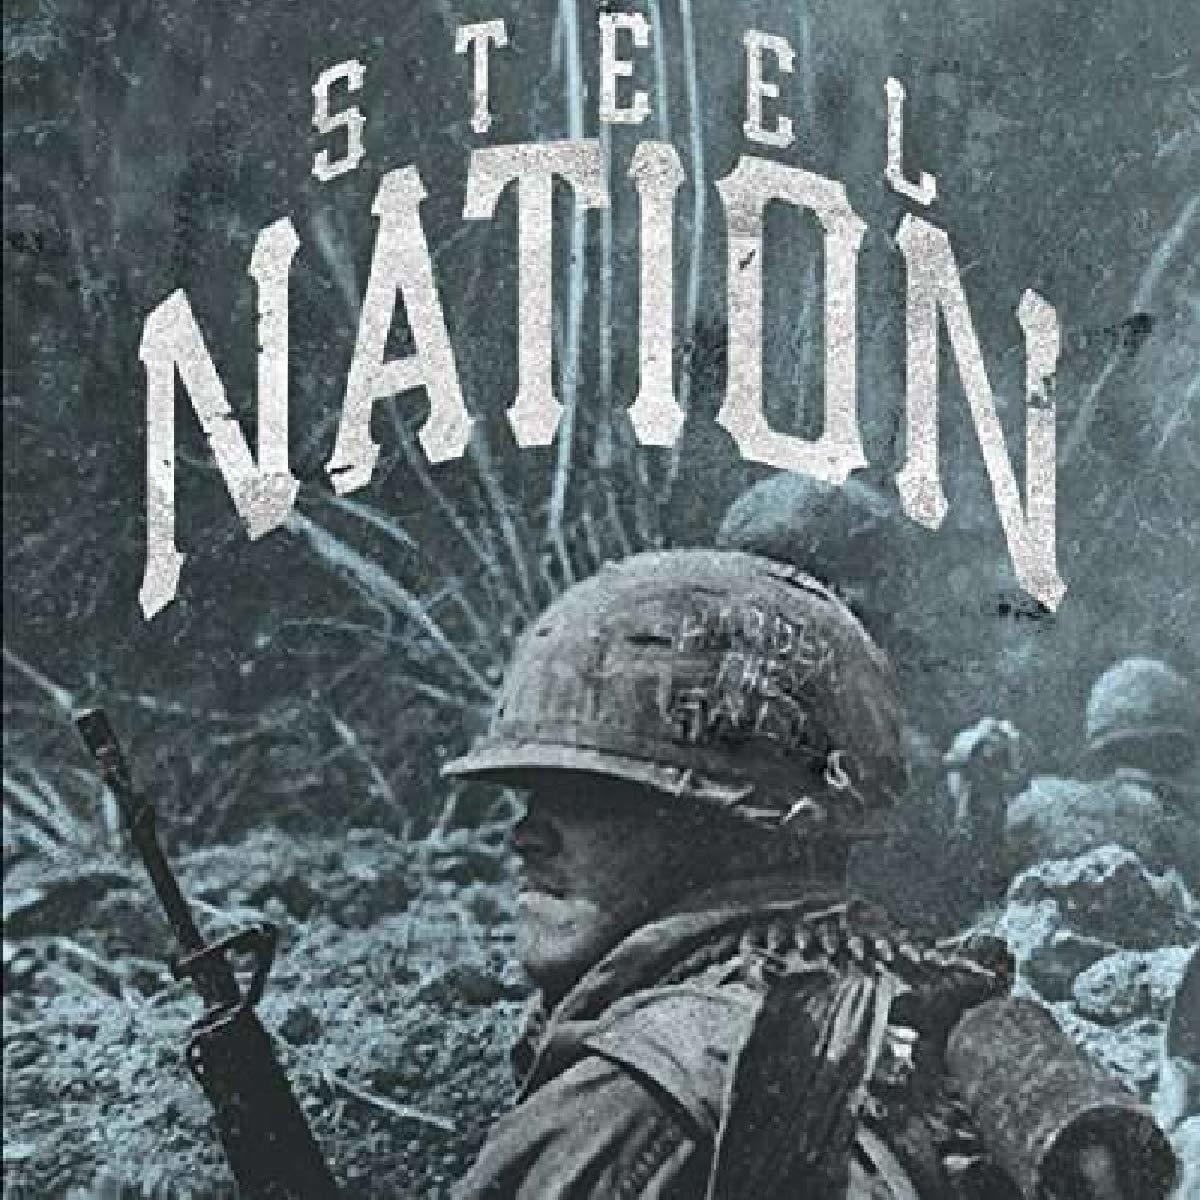 - Steel Nation Fall Harder - (Vinyl) The They